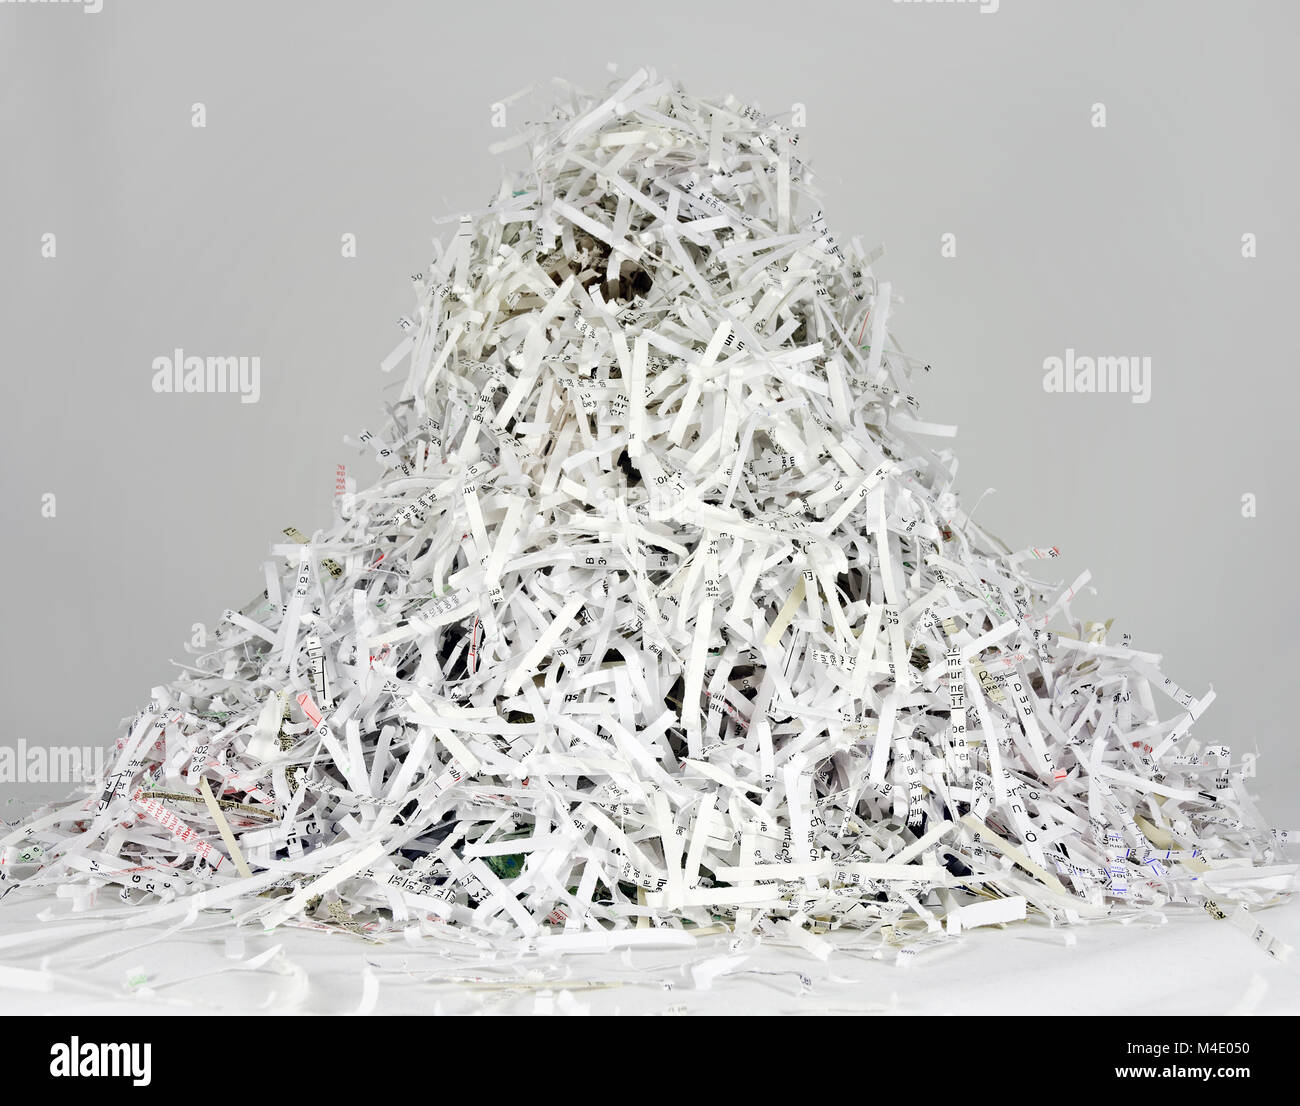 stripes of shredded papers Stock Photo